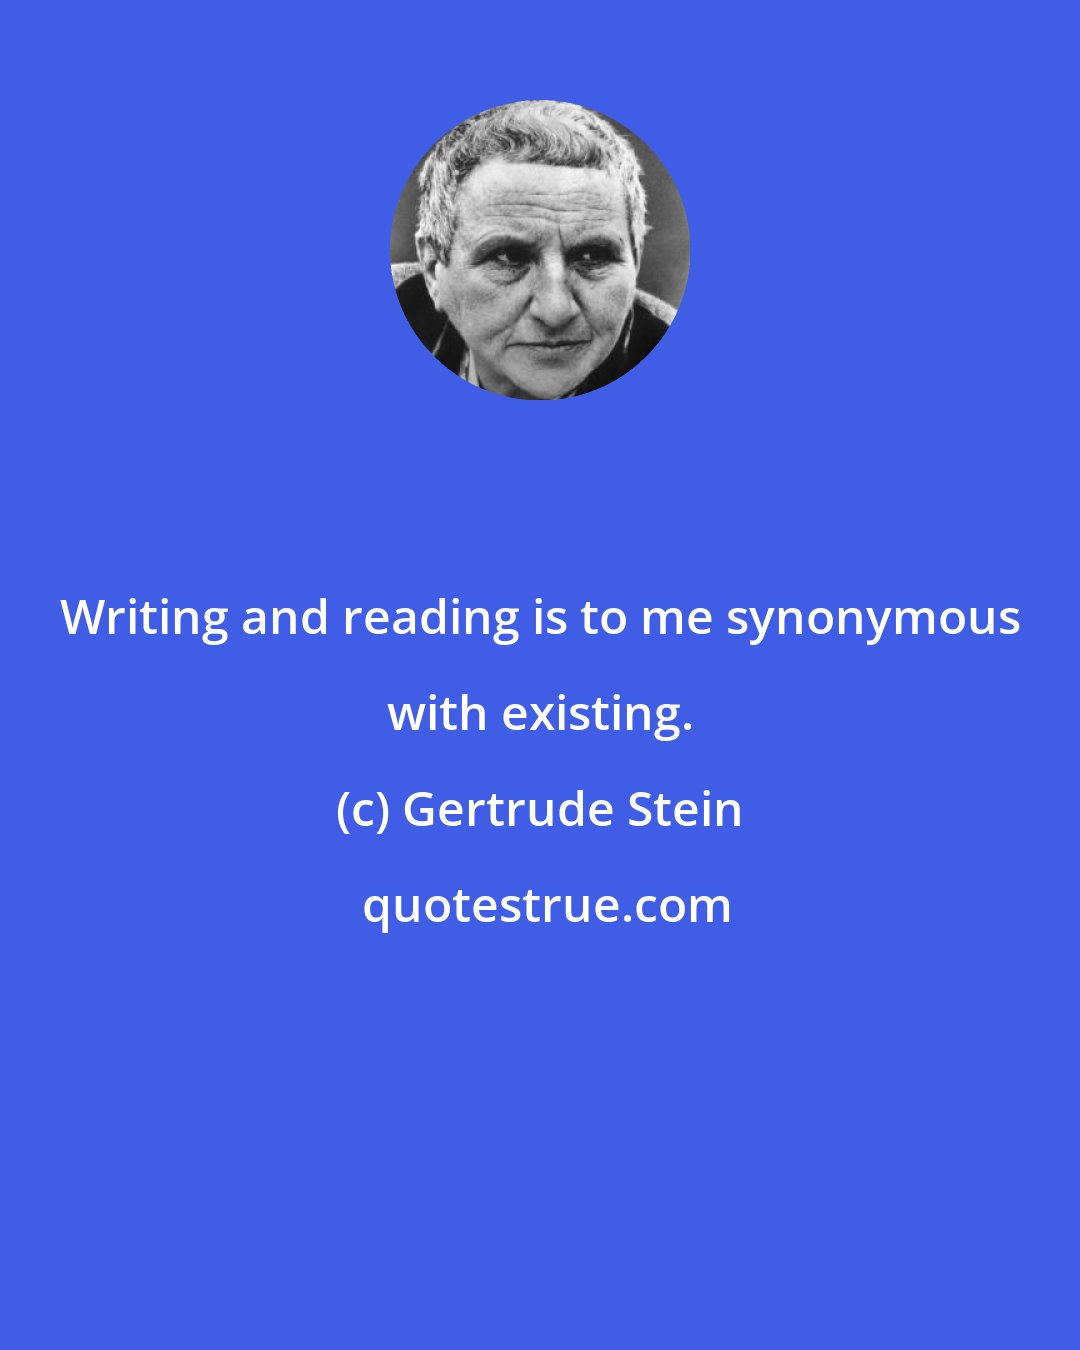 Gertrude Stein: Writing and reading is to me synonymous with existing.